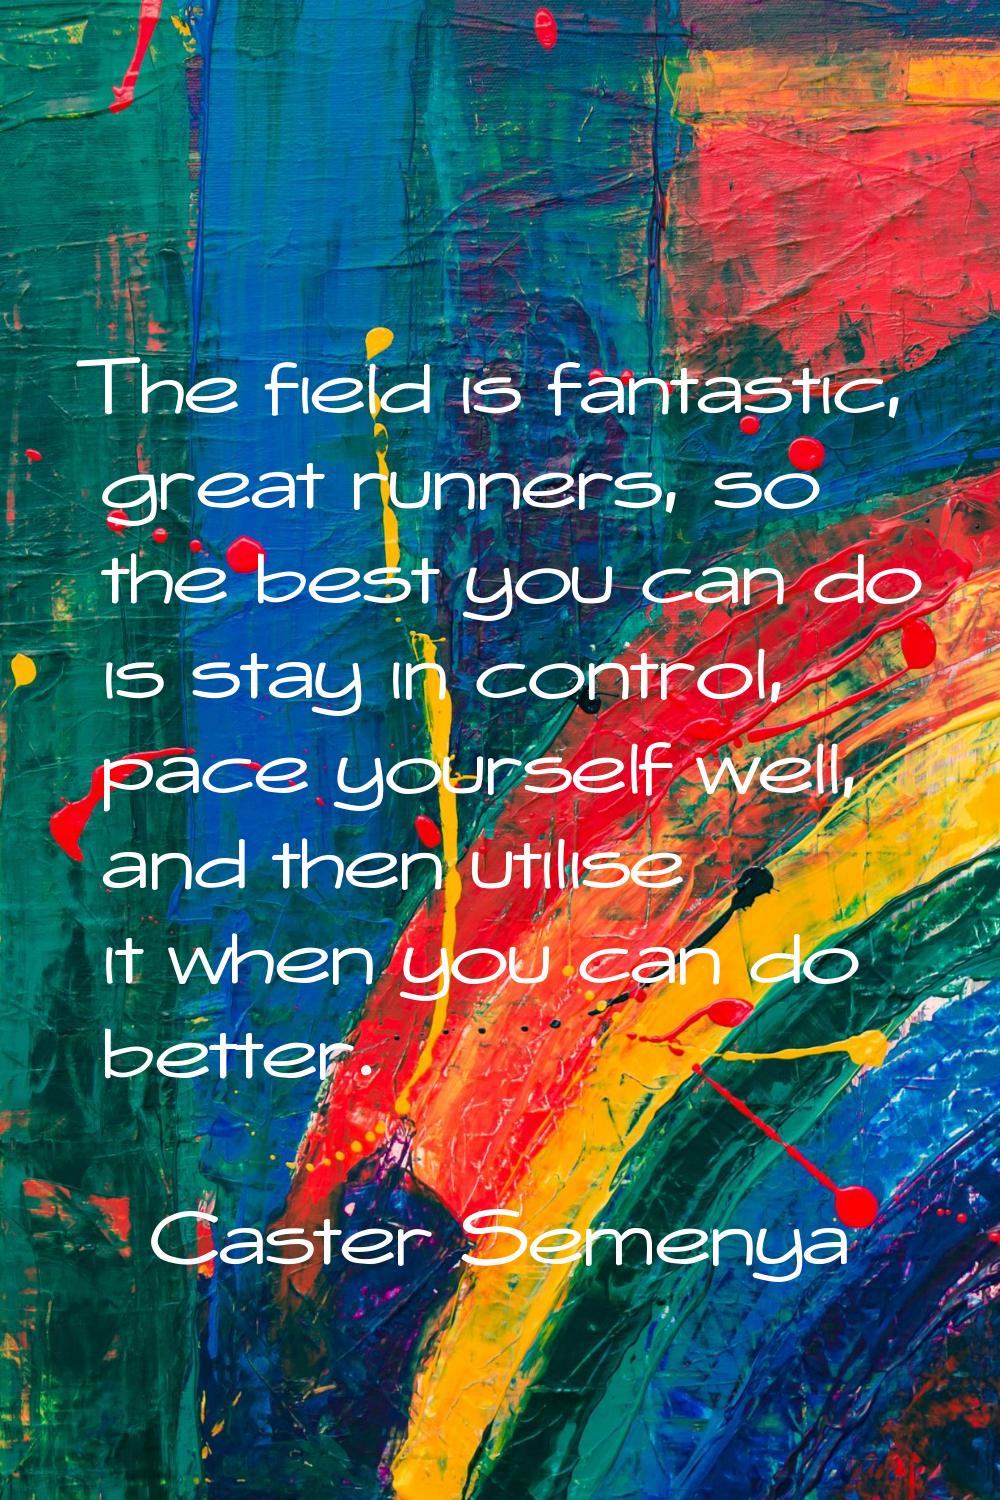 The field is fantastic, great runners, so the best you can do is stay in control, pace yourself wel